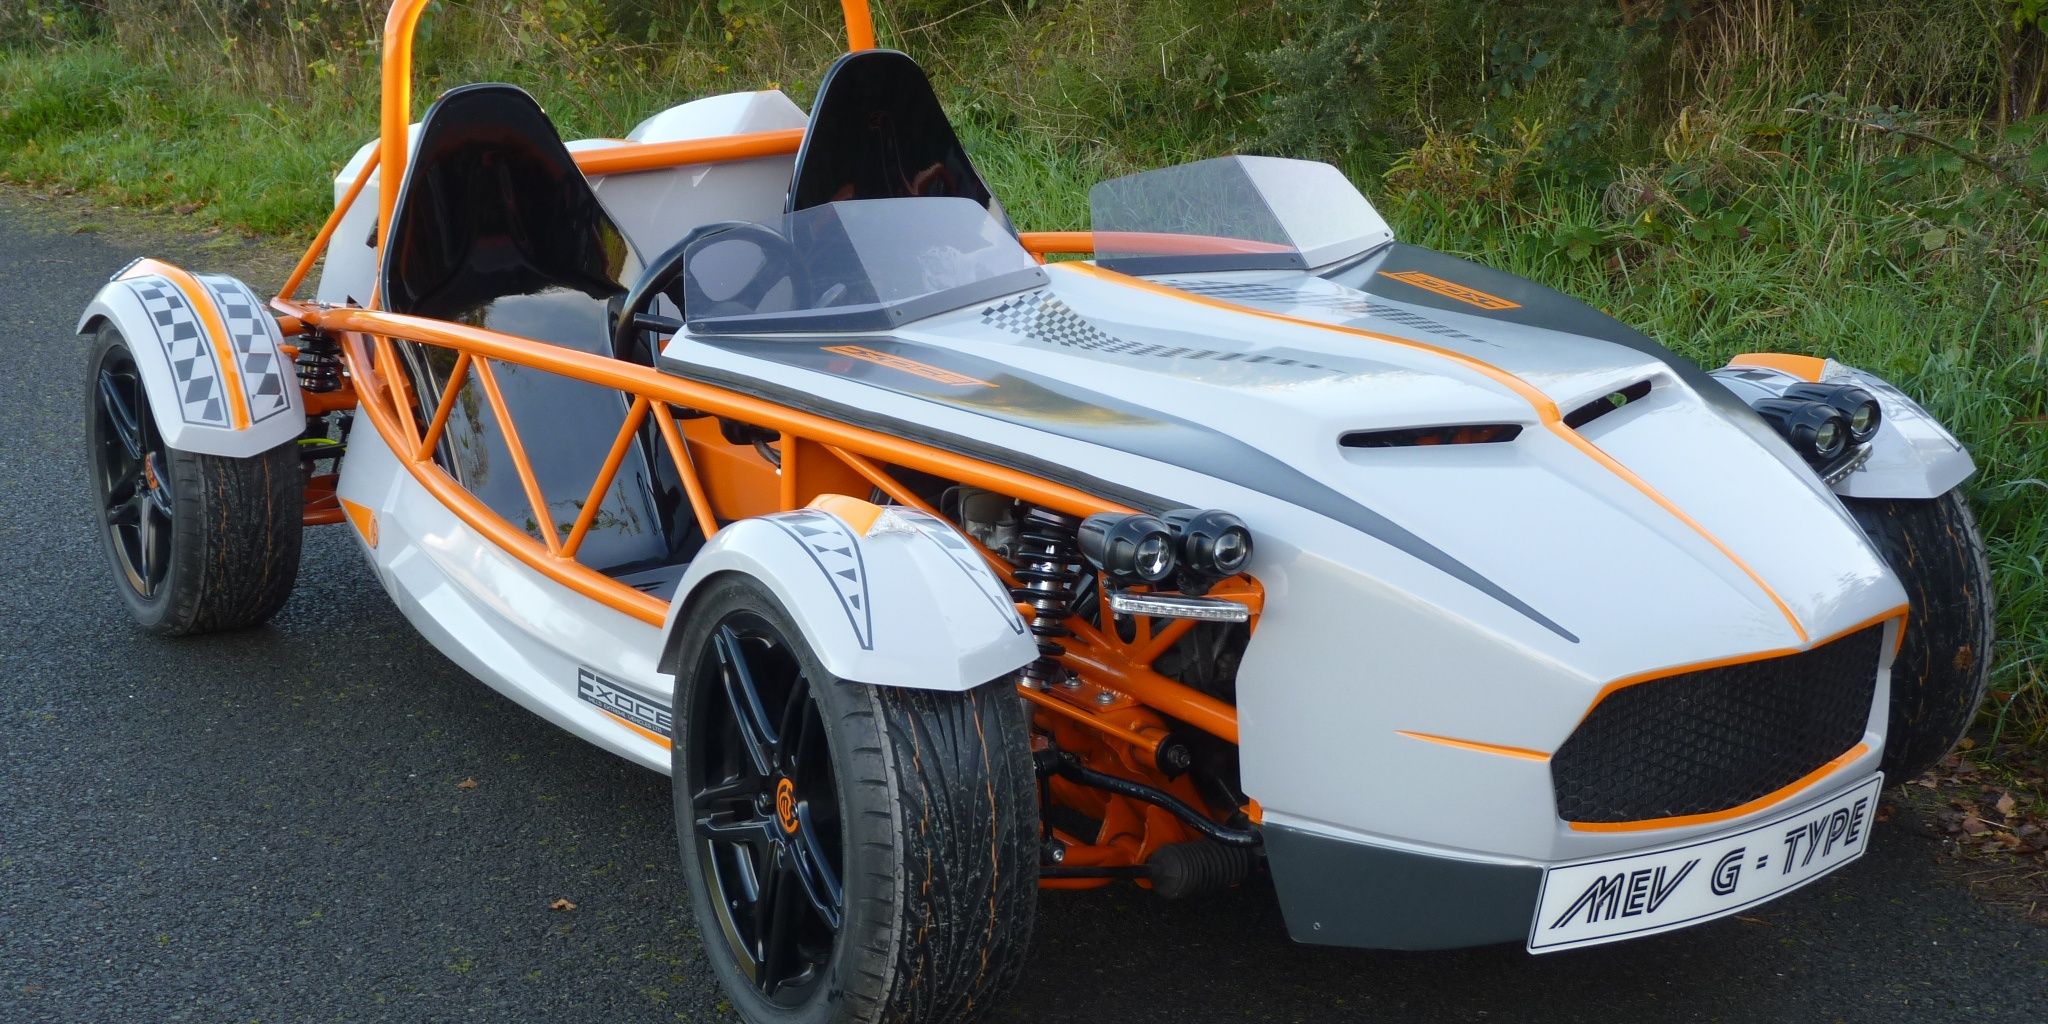 10 Surprisingly Affordable Kit Cars That Will Turn Heads Everywhere You Go